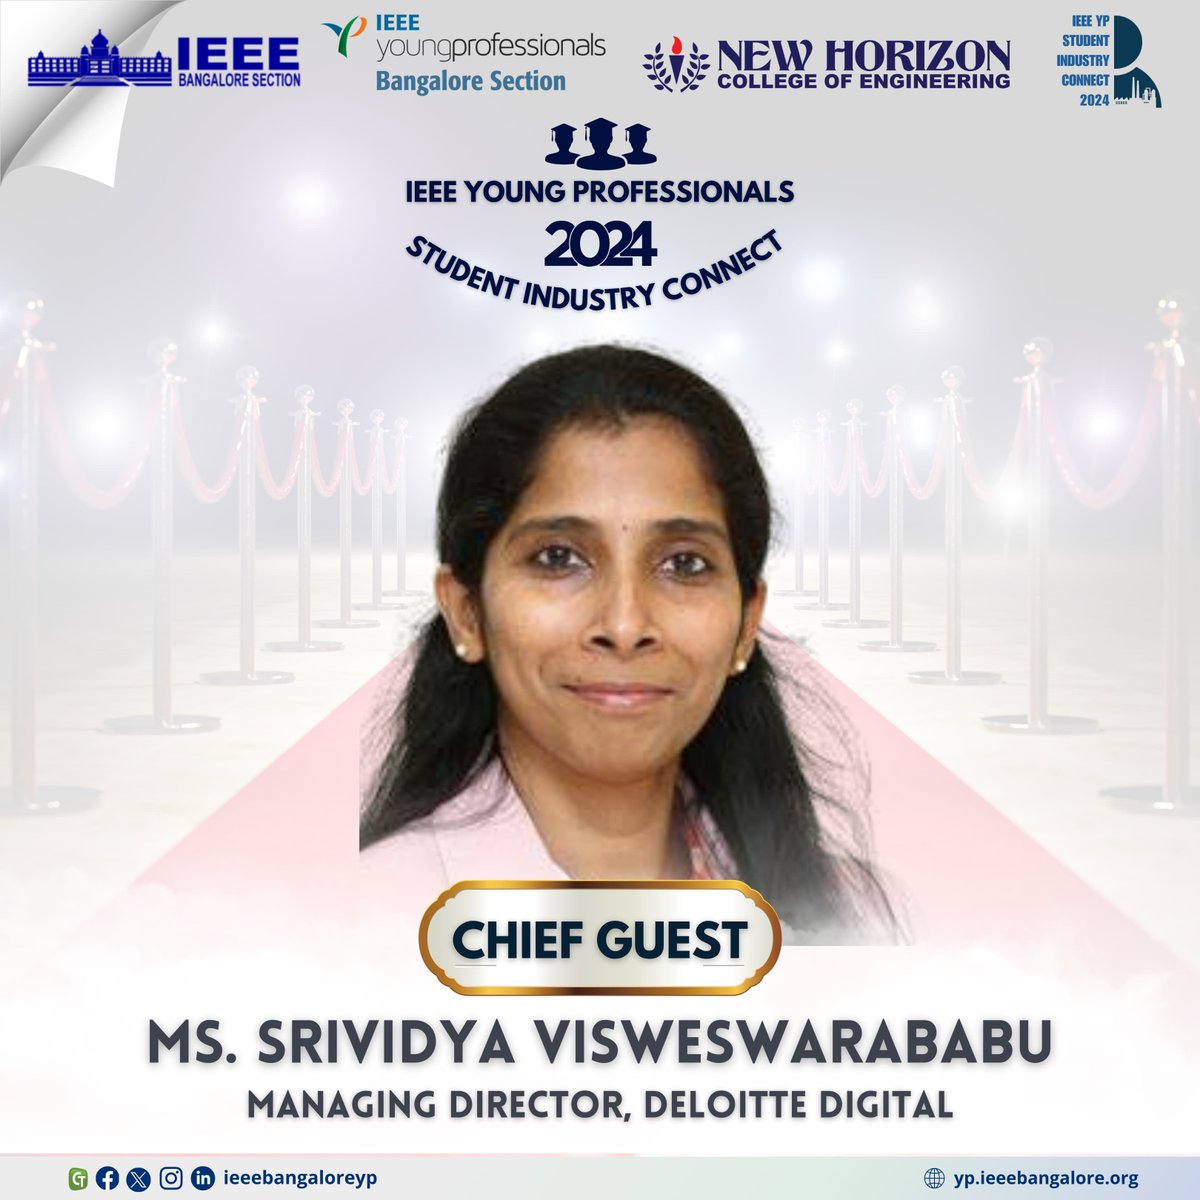 We are honored to have Ms. Srividya Visweswarababu, Managing Director, Deloitte Digital as our Chief Guest.